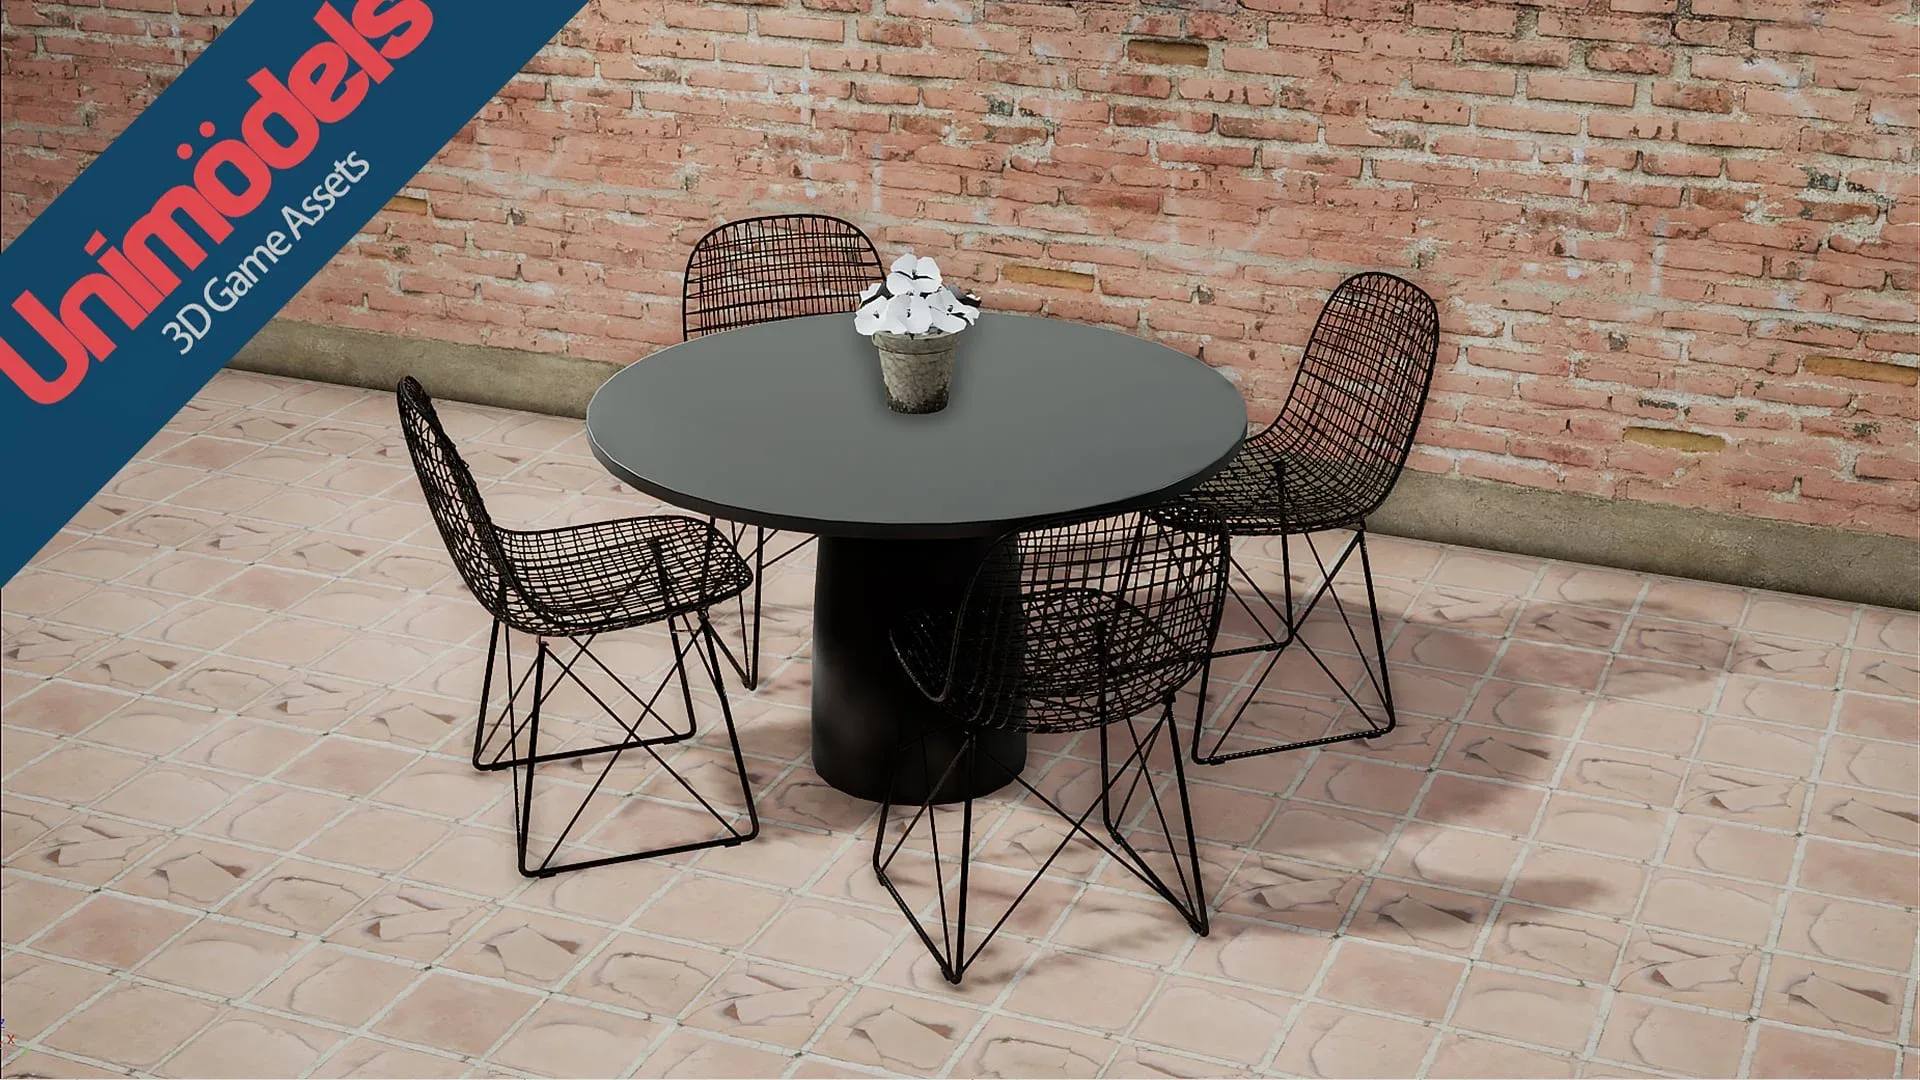 Unimodels Exterior Chairs & Tables for Unity